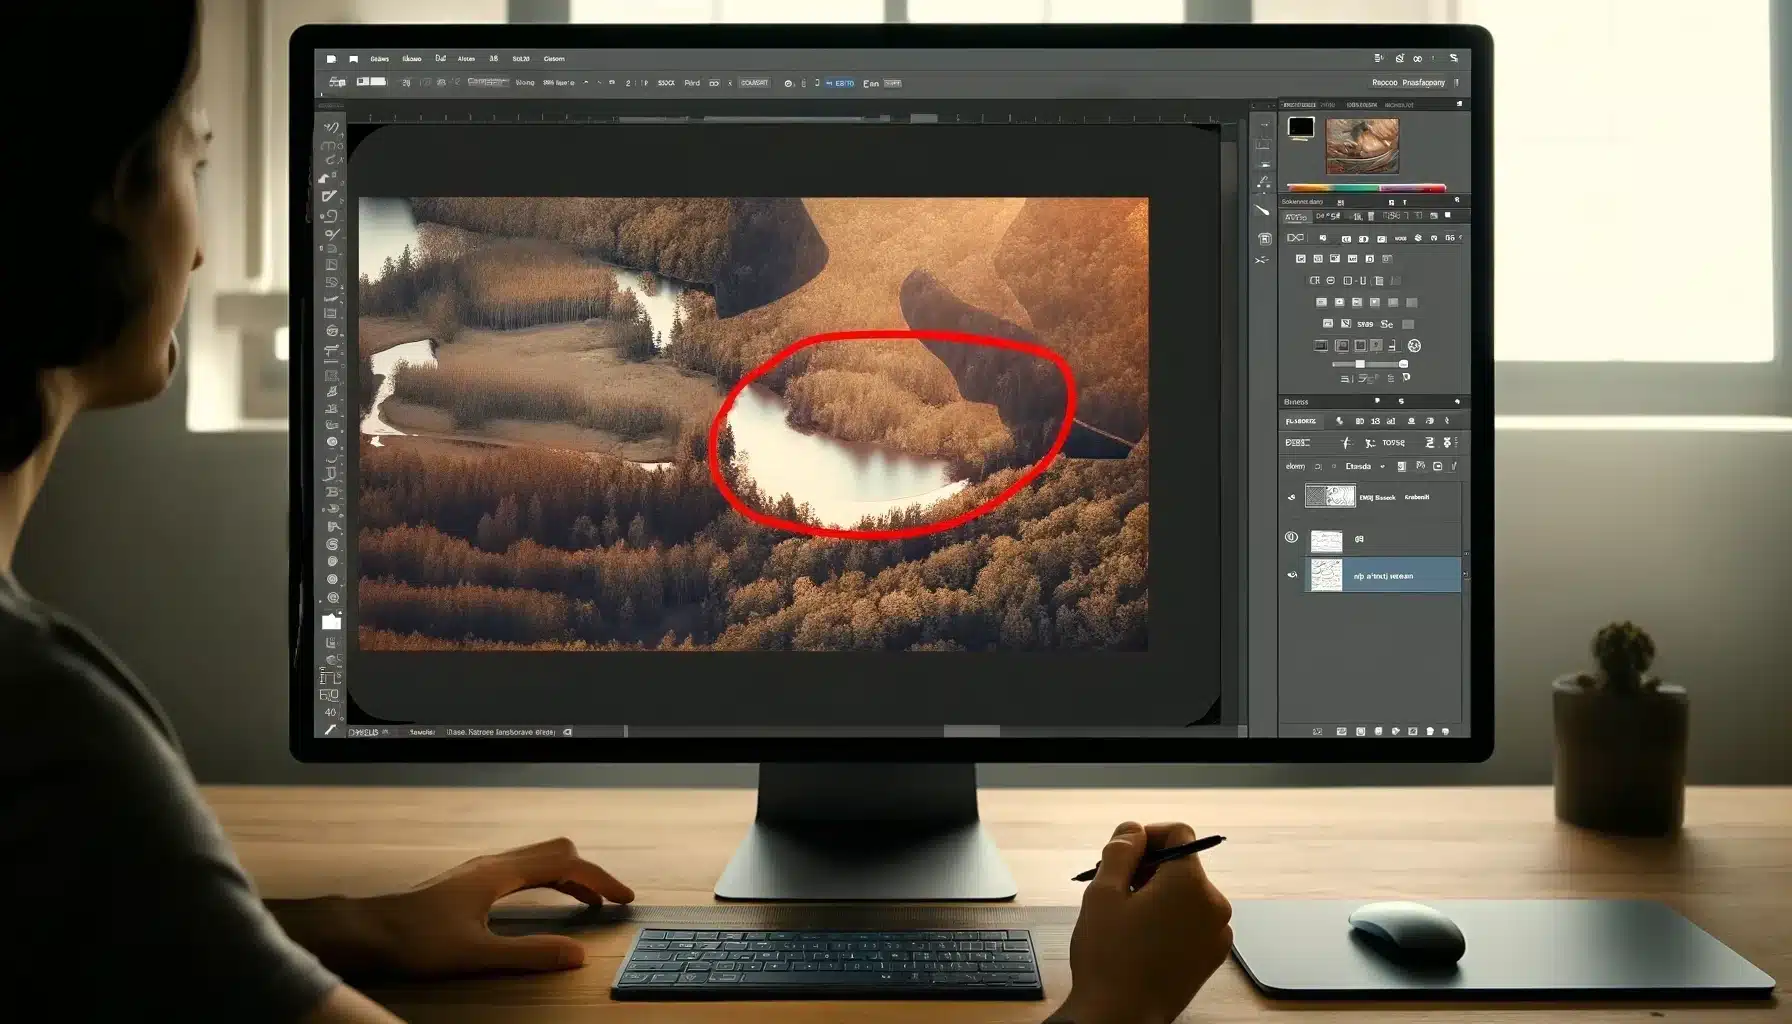 A computer screen displaying Adobe Photoshop with a nature image, highlighted by a red circle on a smaller lake. Red arrows point to the zoom tool and software tools on the toolbar.